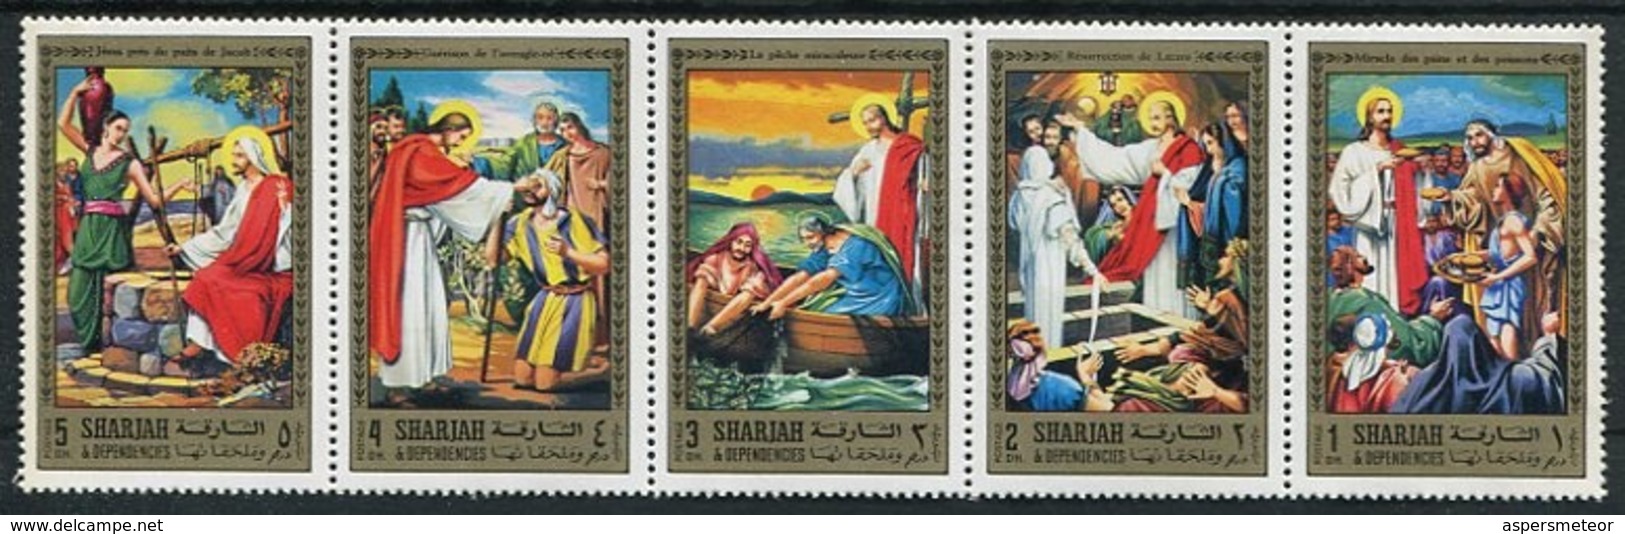 MIRACLES OF JESUS / MILAGROS DE JESUS - SHARJAH MICHEL 759 / 763 MNH GOLD SERIE - LILHU - Christianisme